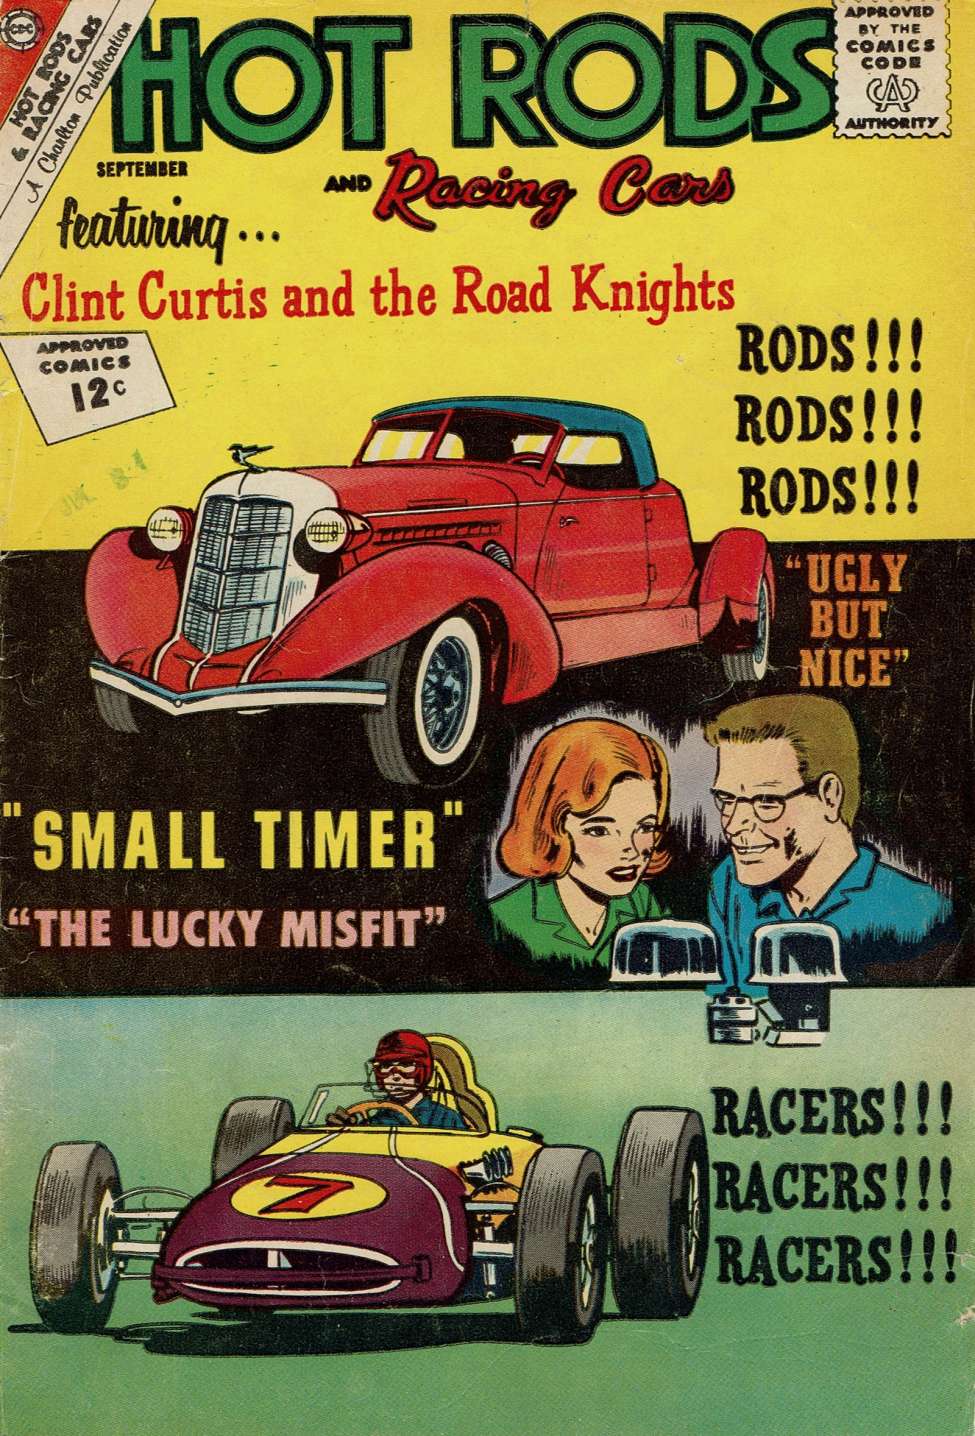 Book Cover For Hot Rods and Racing Cars 59